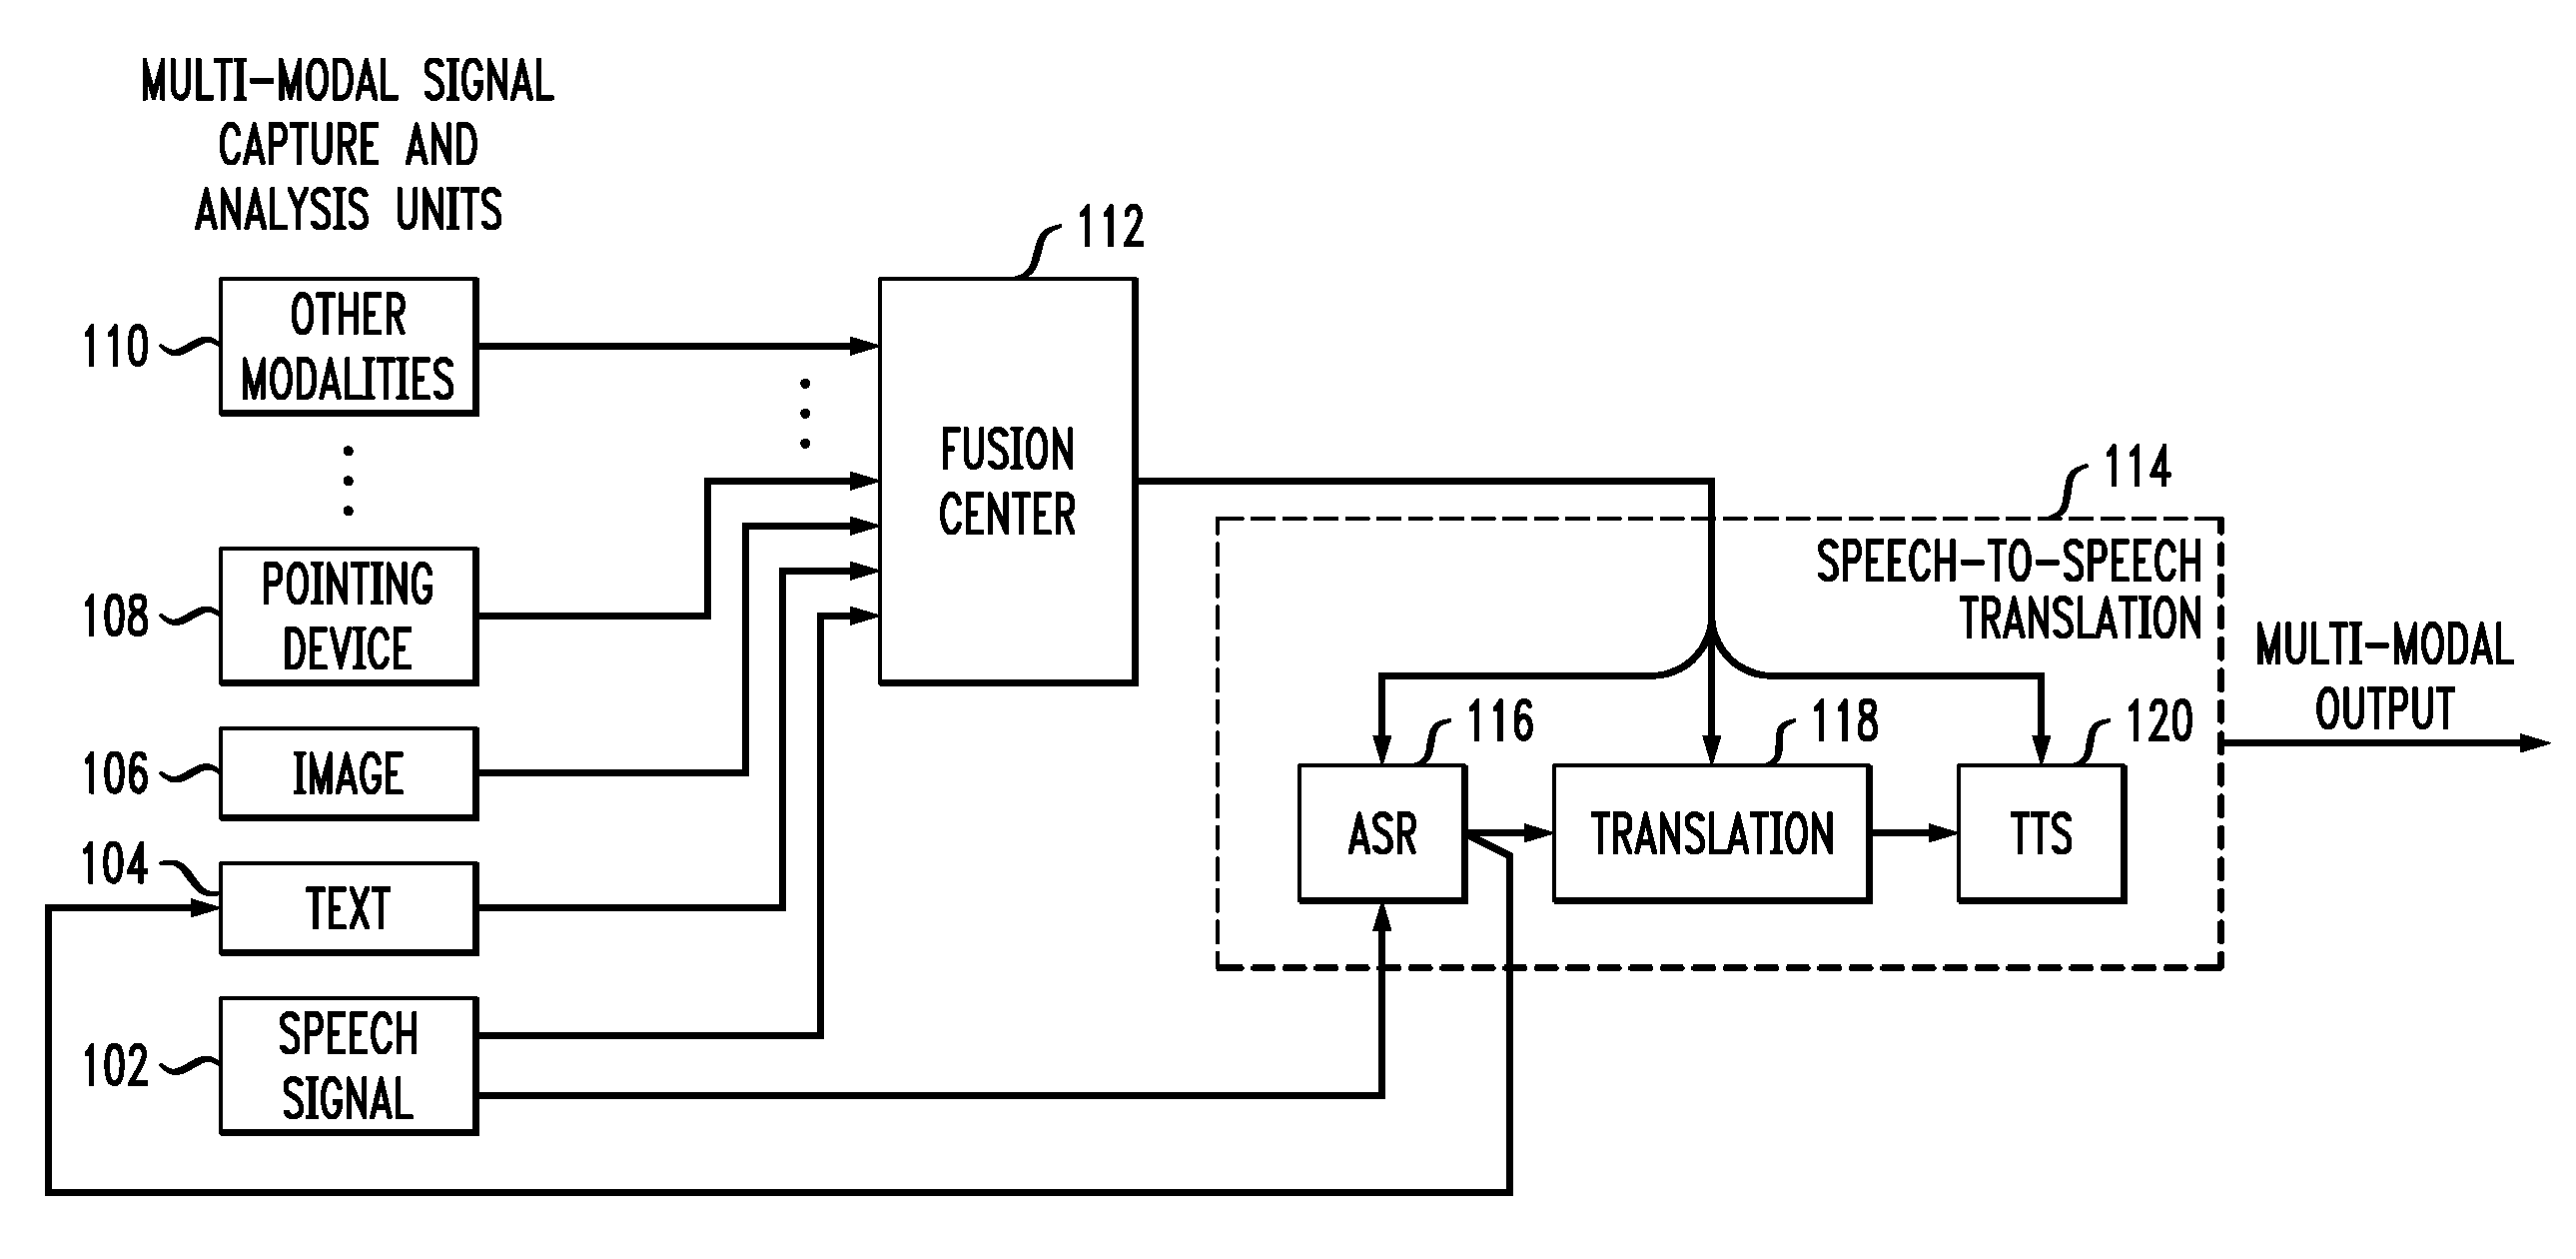 Methods and apparatus for context adaptation of speech-to-speech translation systems